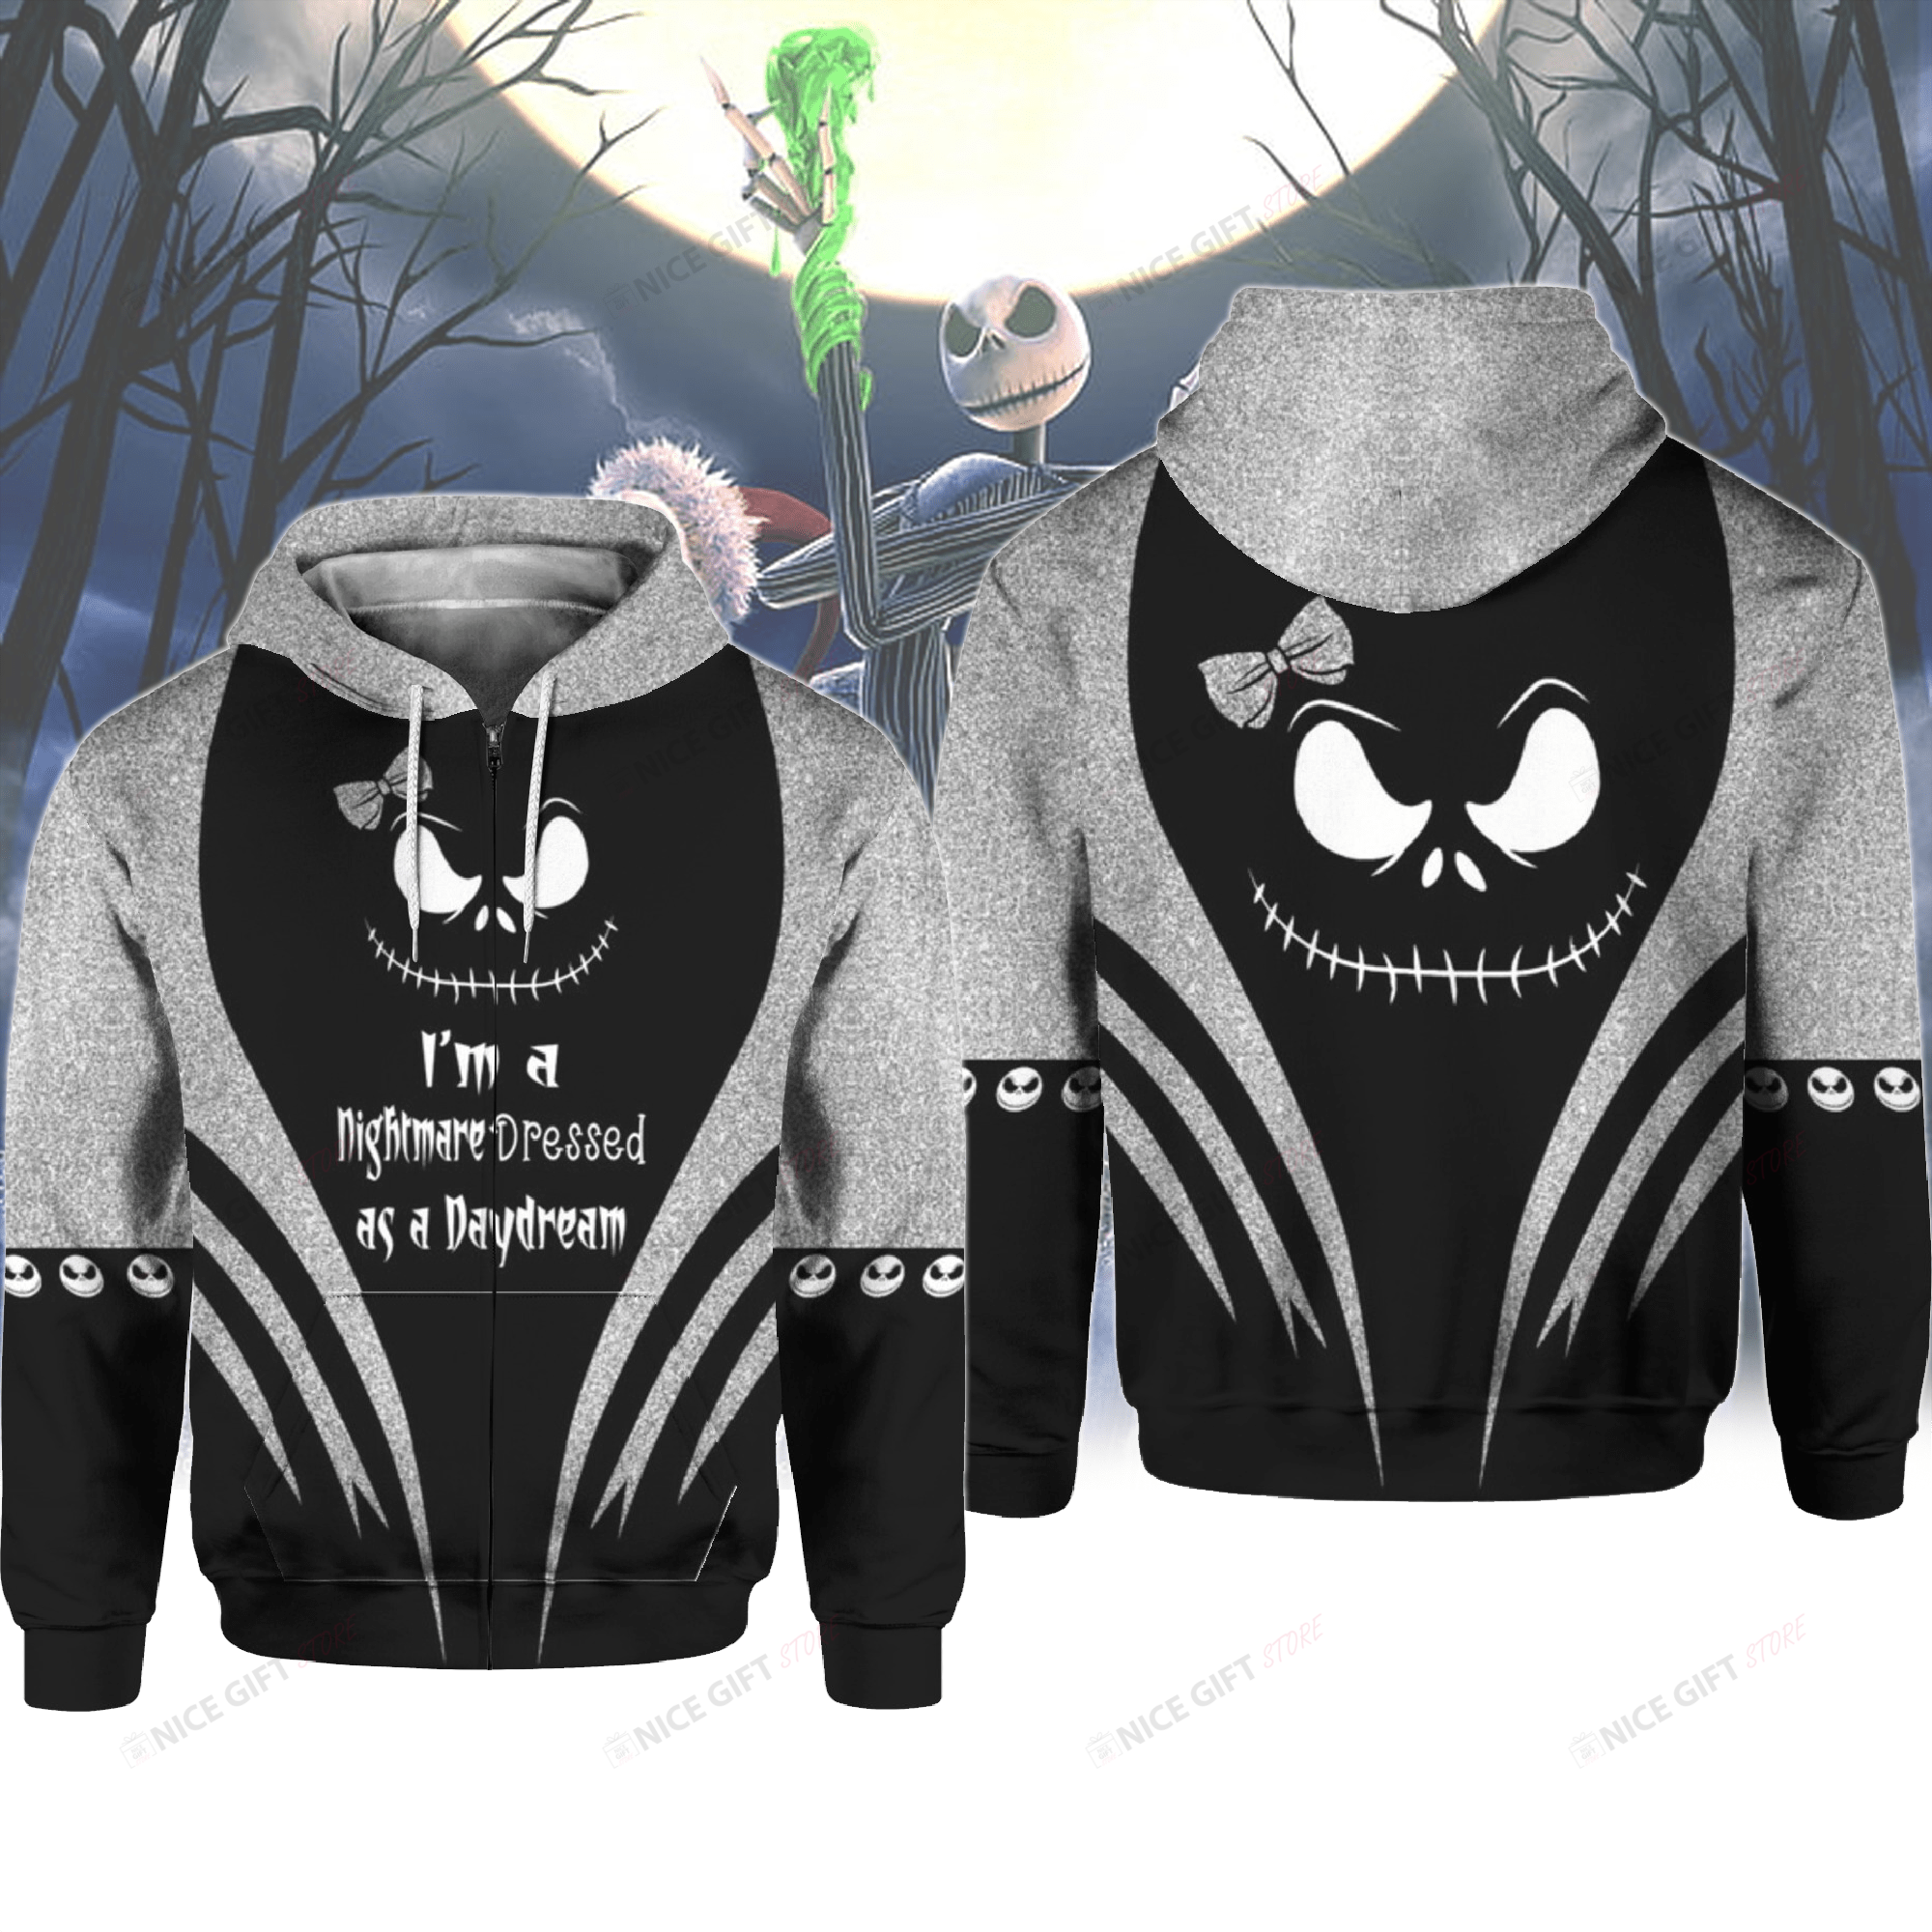 Jack Skellington I'm A Nightmare Dress As A Daydream Zip Hoodie 3D 3ZH-S7R2